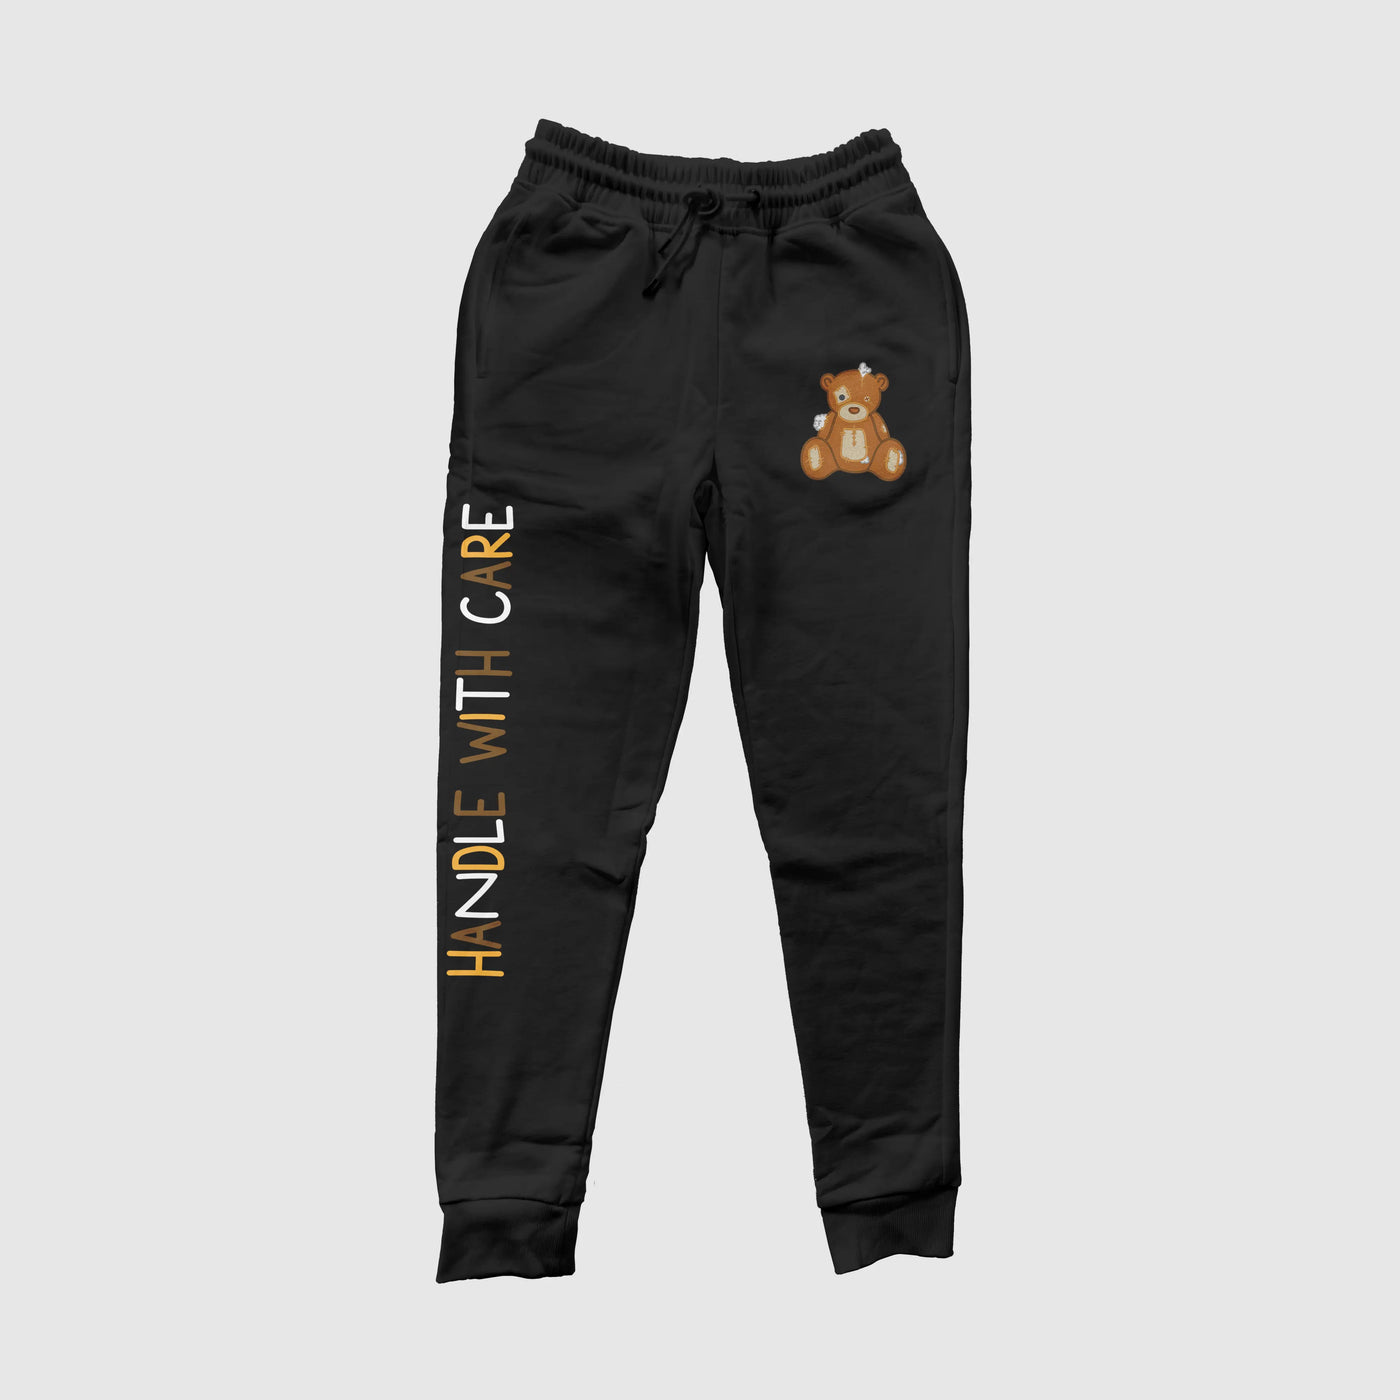 "Handle With Care" Black Jogger Pants Joggers D.R.E.A.M. Clothing